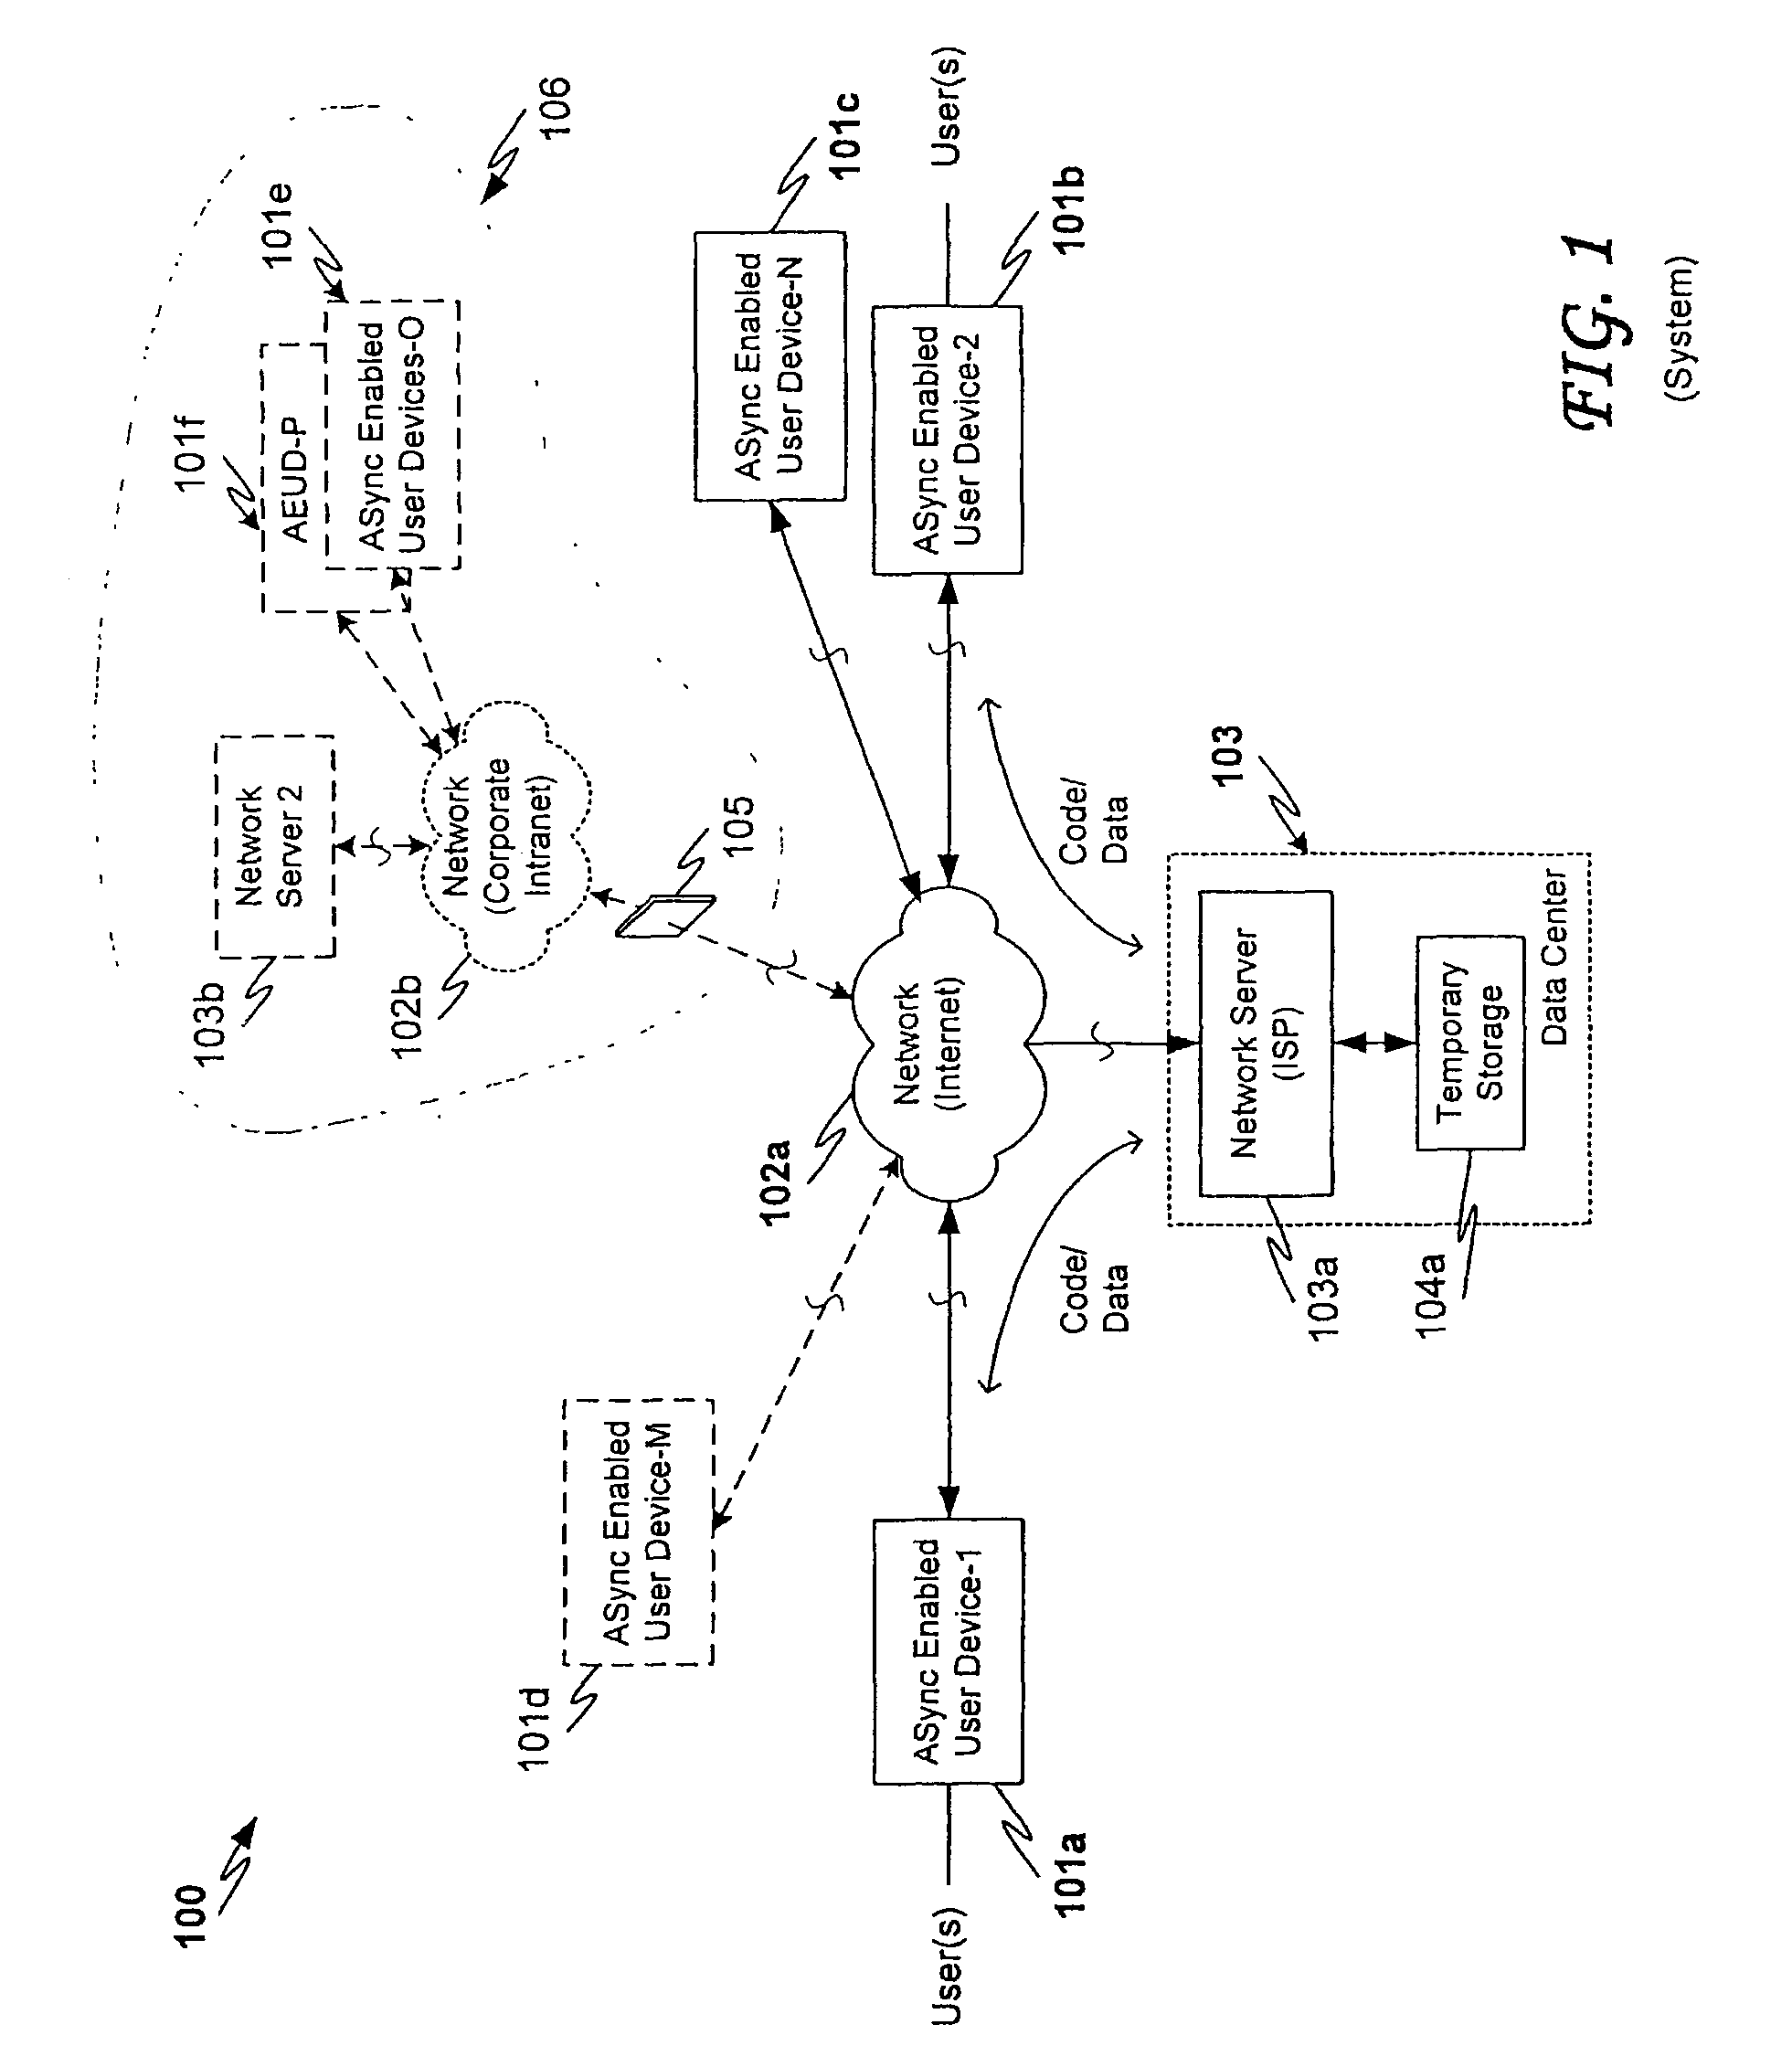 System and methods for asynchronous synchronization